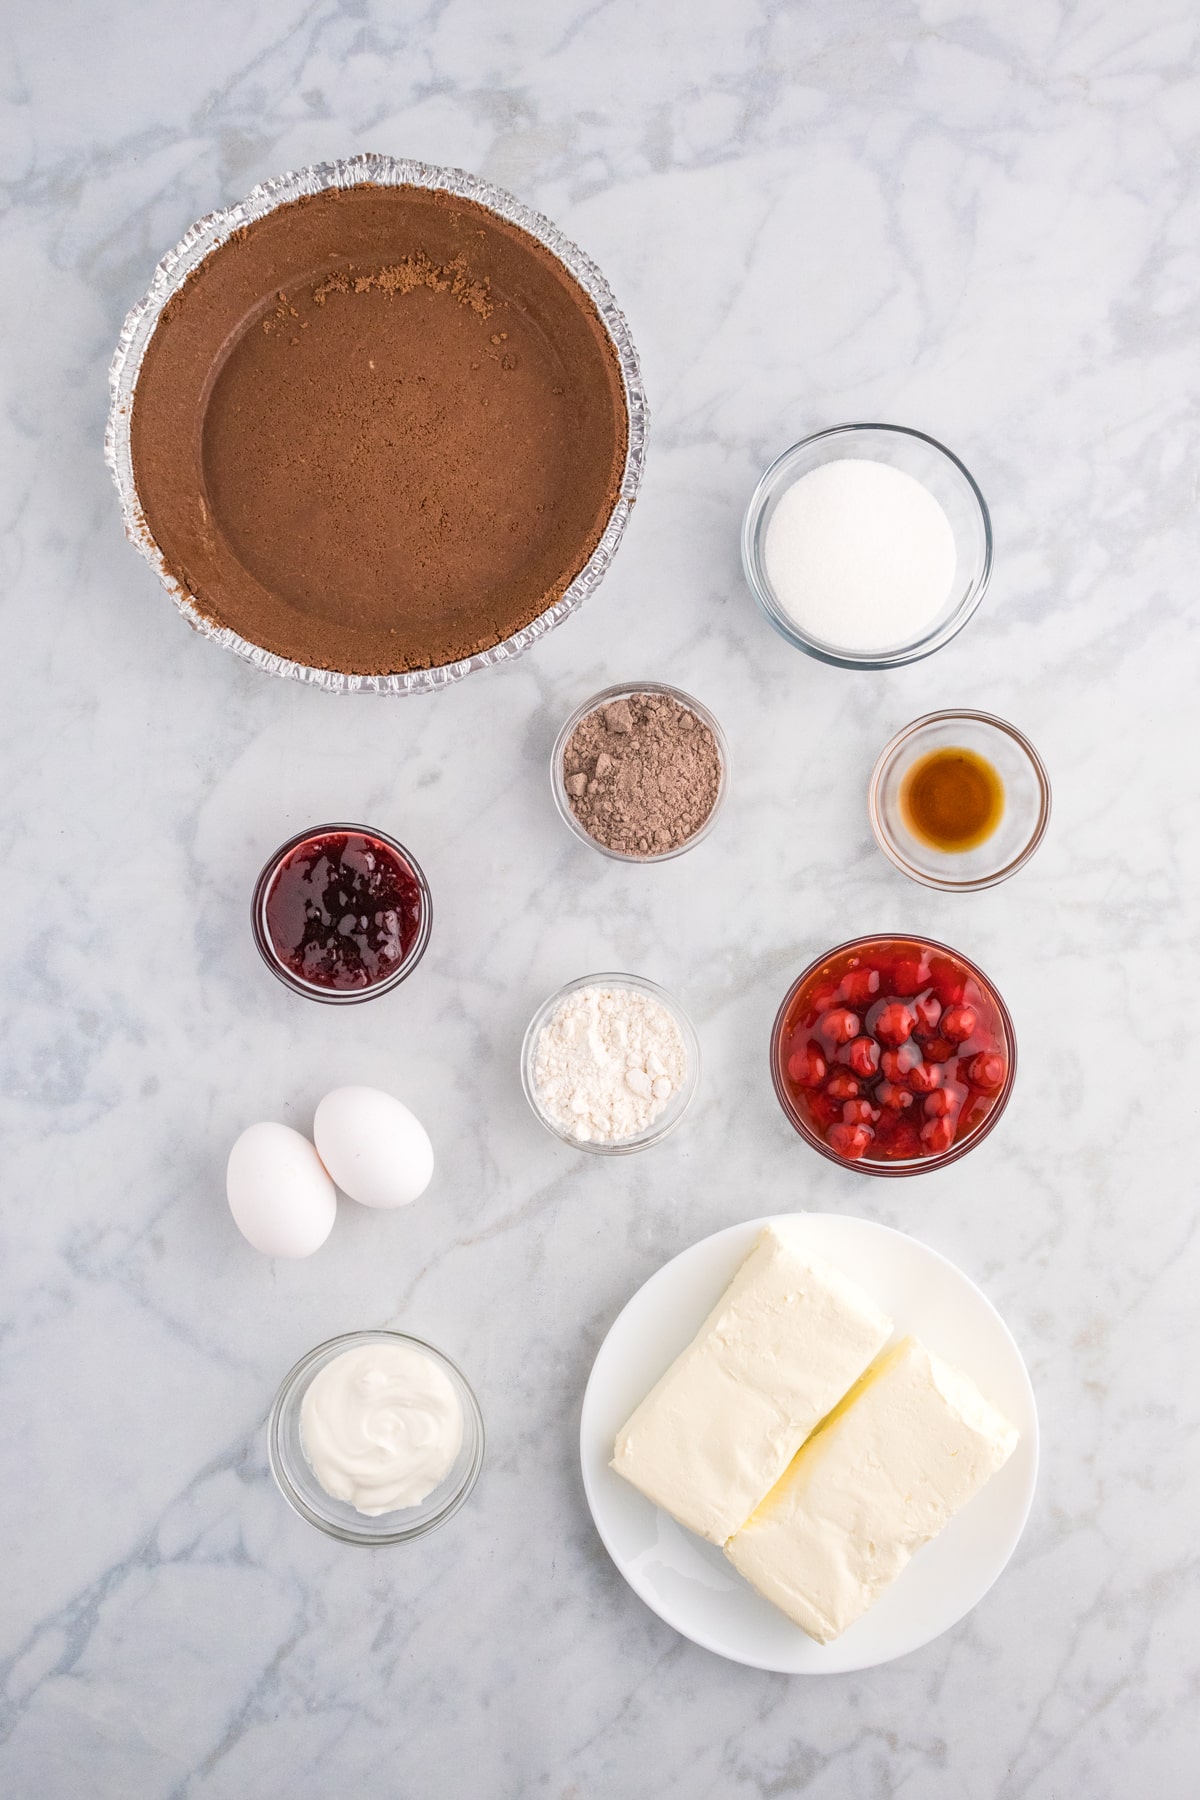 Ingredients for Chocolate Cherry Cheesecake are premade chocolate pie crust, softened cream cheese, granulated sugar, large eggs, sour cream, all purpose flour, vanilla extract, instant chocolate pudding mix, cherry preserves, cherry pie filling, and whipped cream for topping.